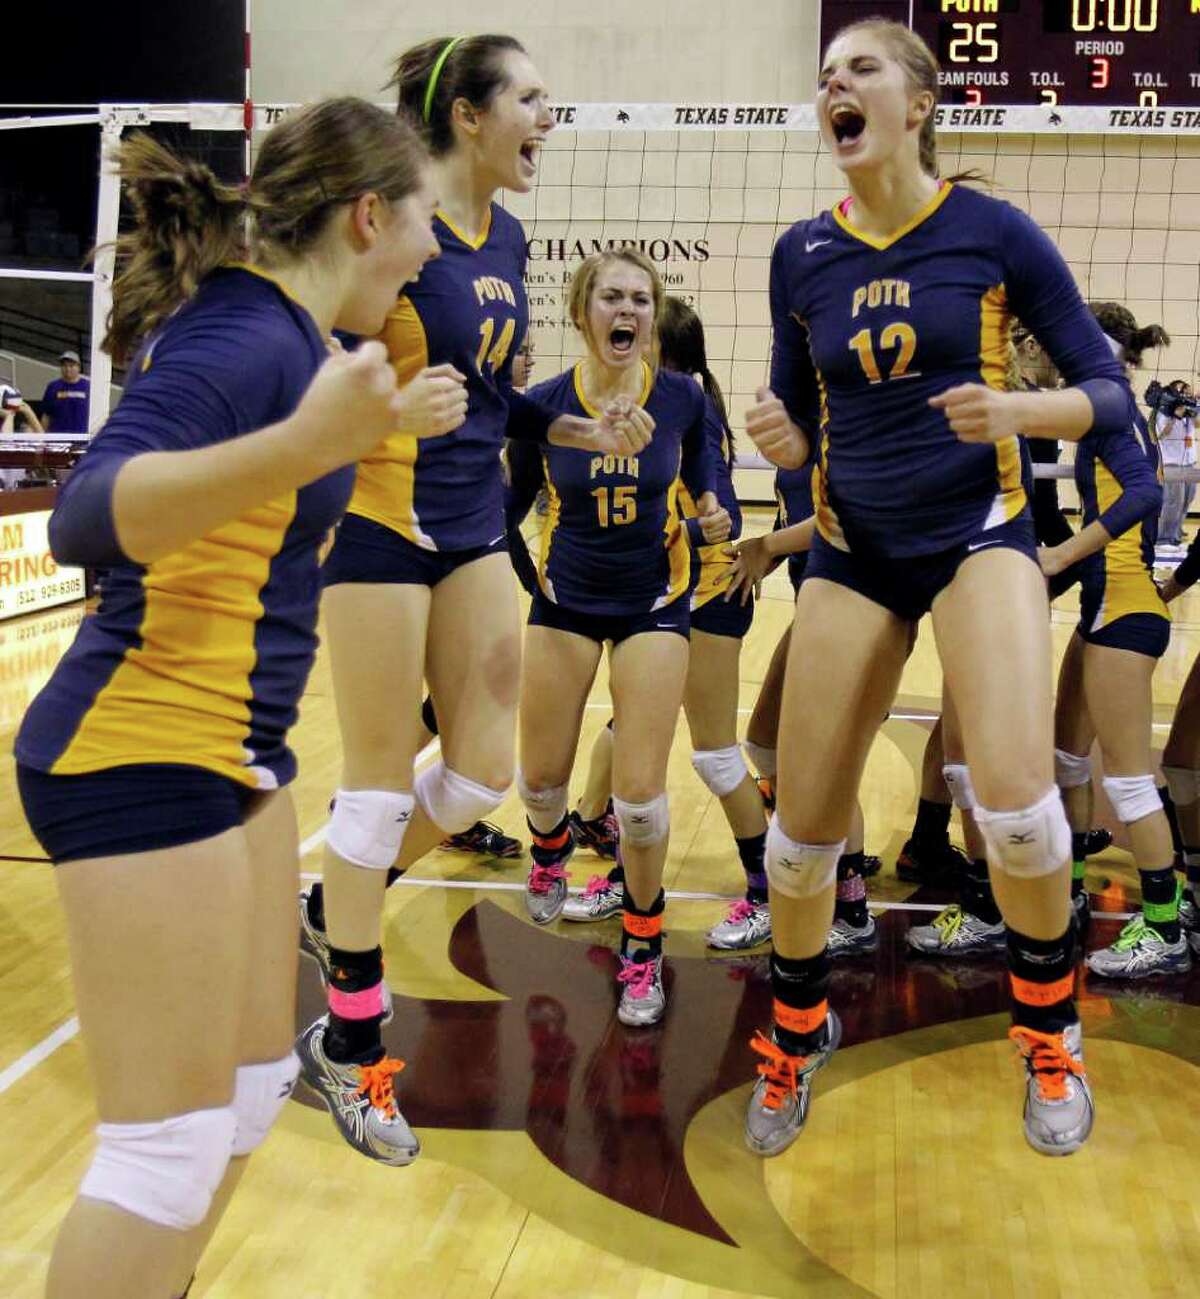 Poth's Jordan Kotara, right, celebrates with her teammates, including Kelsee Felux (14) and Corin Nelson (15), after defeating Nocona in the class 2A state volleyball final at Strahan Coliseum at Texas State University on Saturday, Nov. 19, 2011. MICHAEL MILLER / mmiller@express-news.net